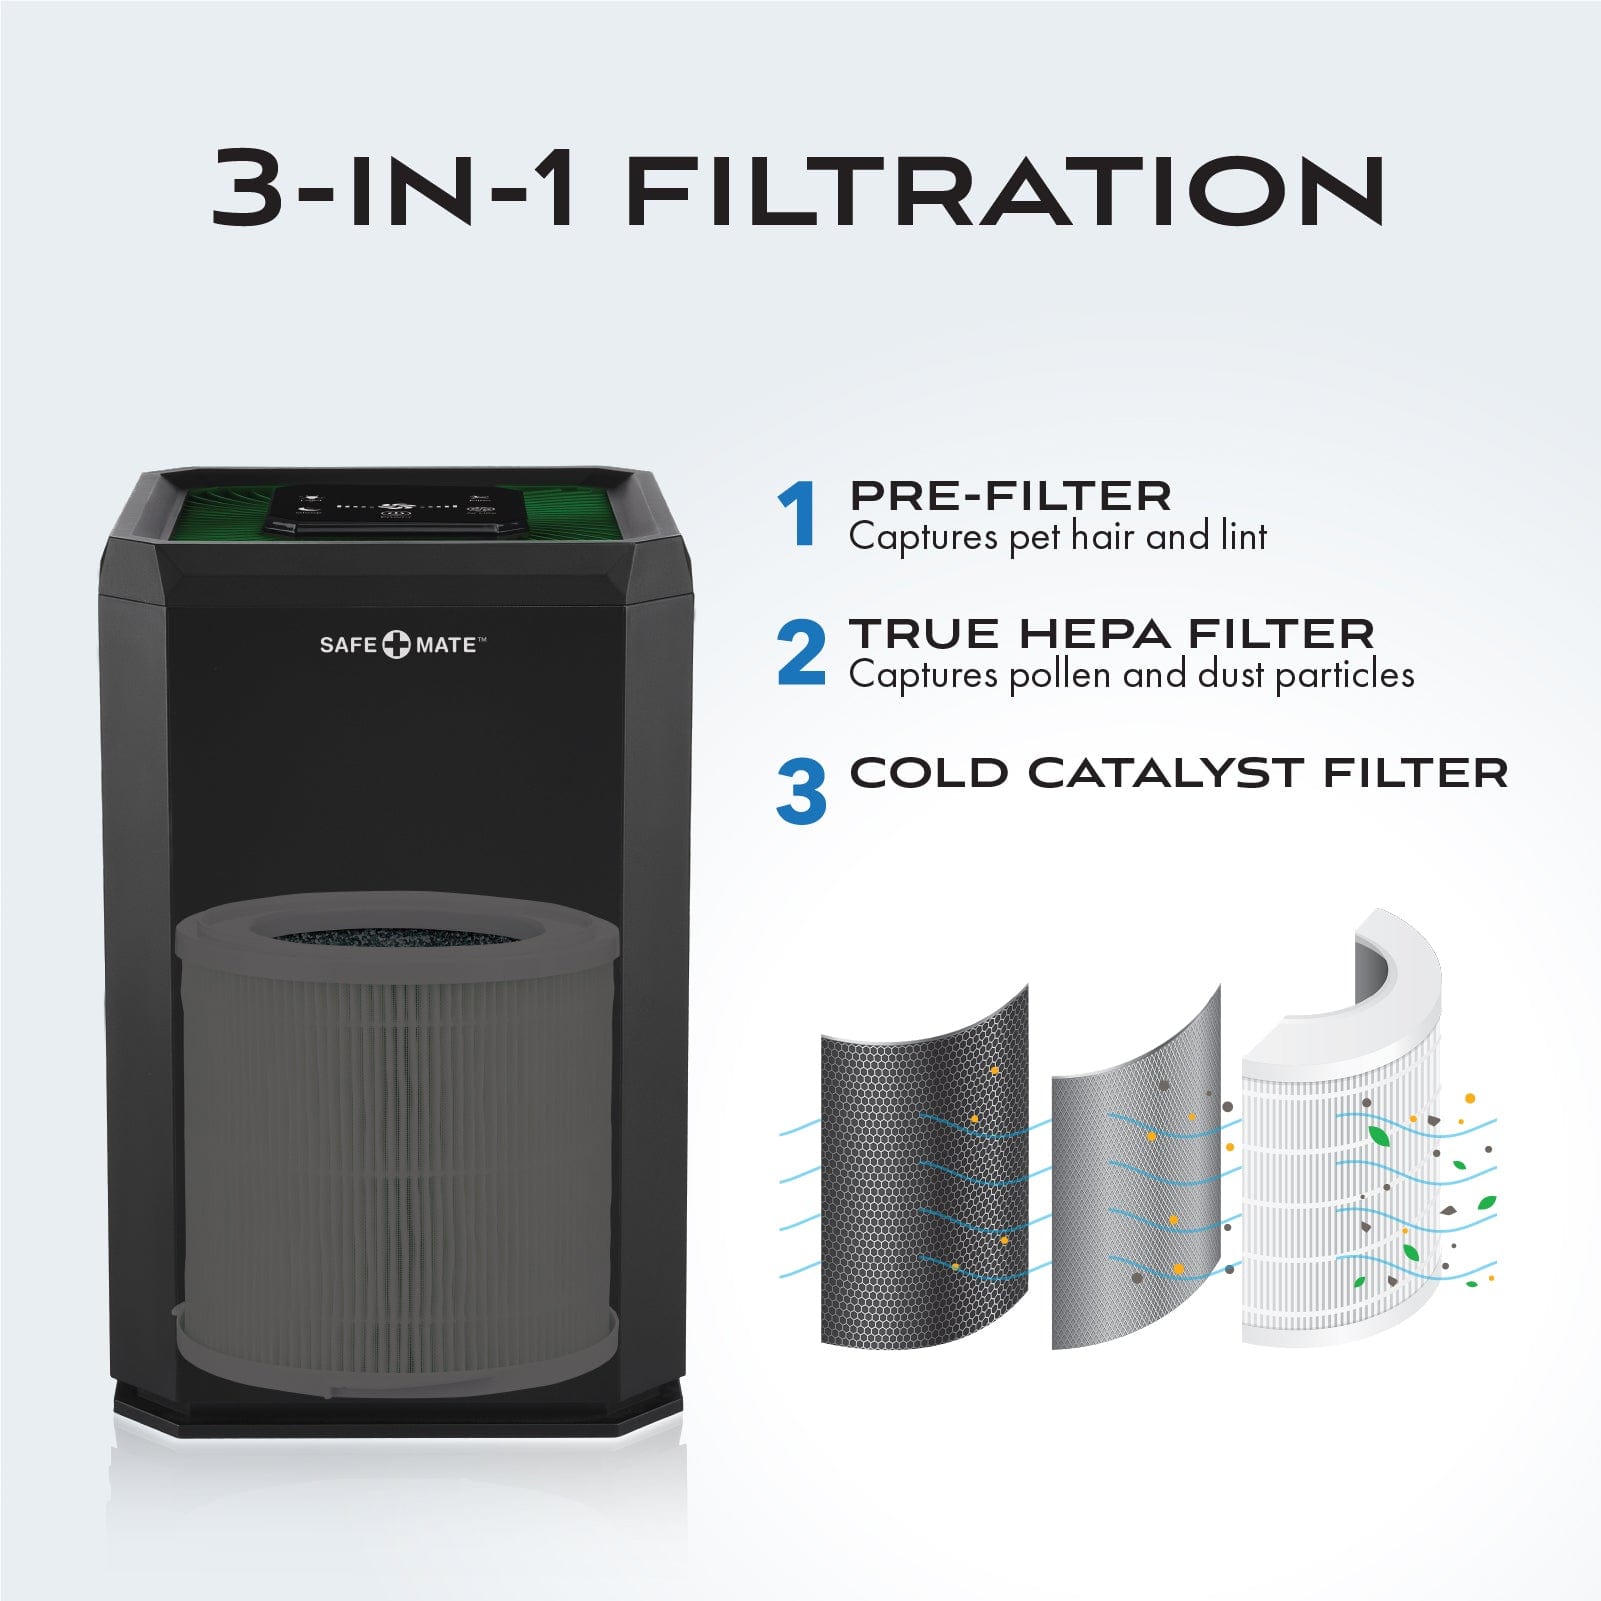 3 in 1 filtration. Prefilter captures pet hair and lint, true HEPA filter captures pollen and dust particles, cold catalyst filter